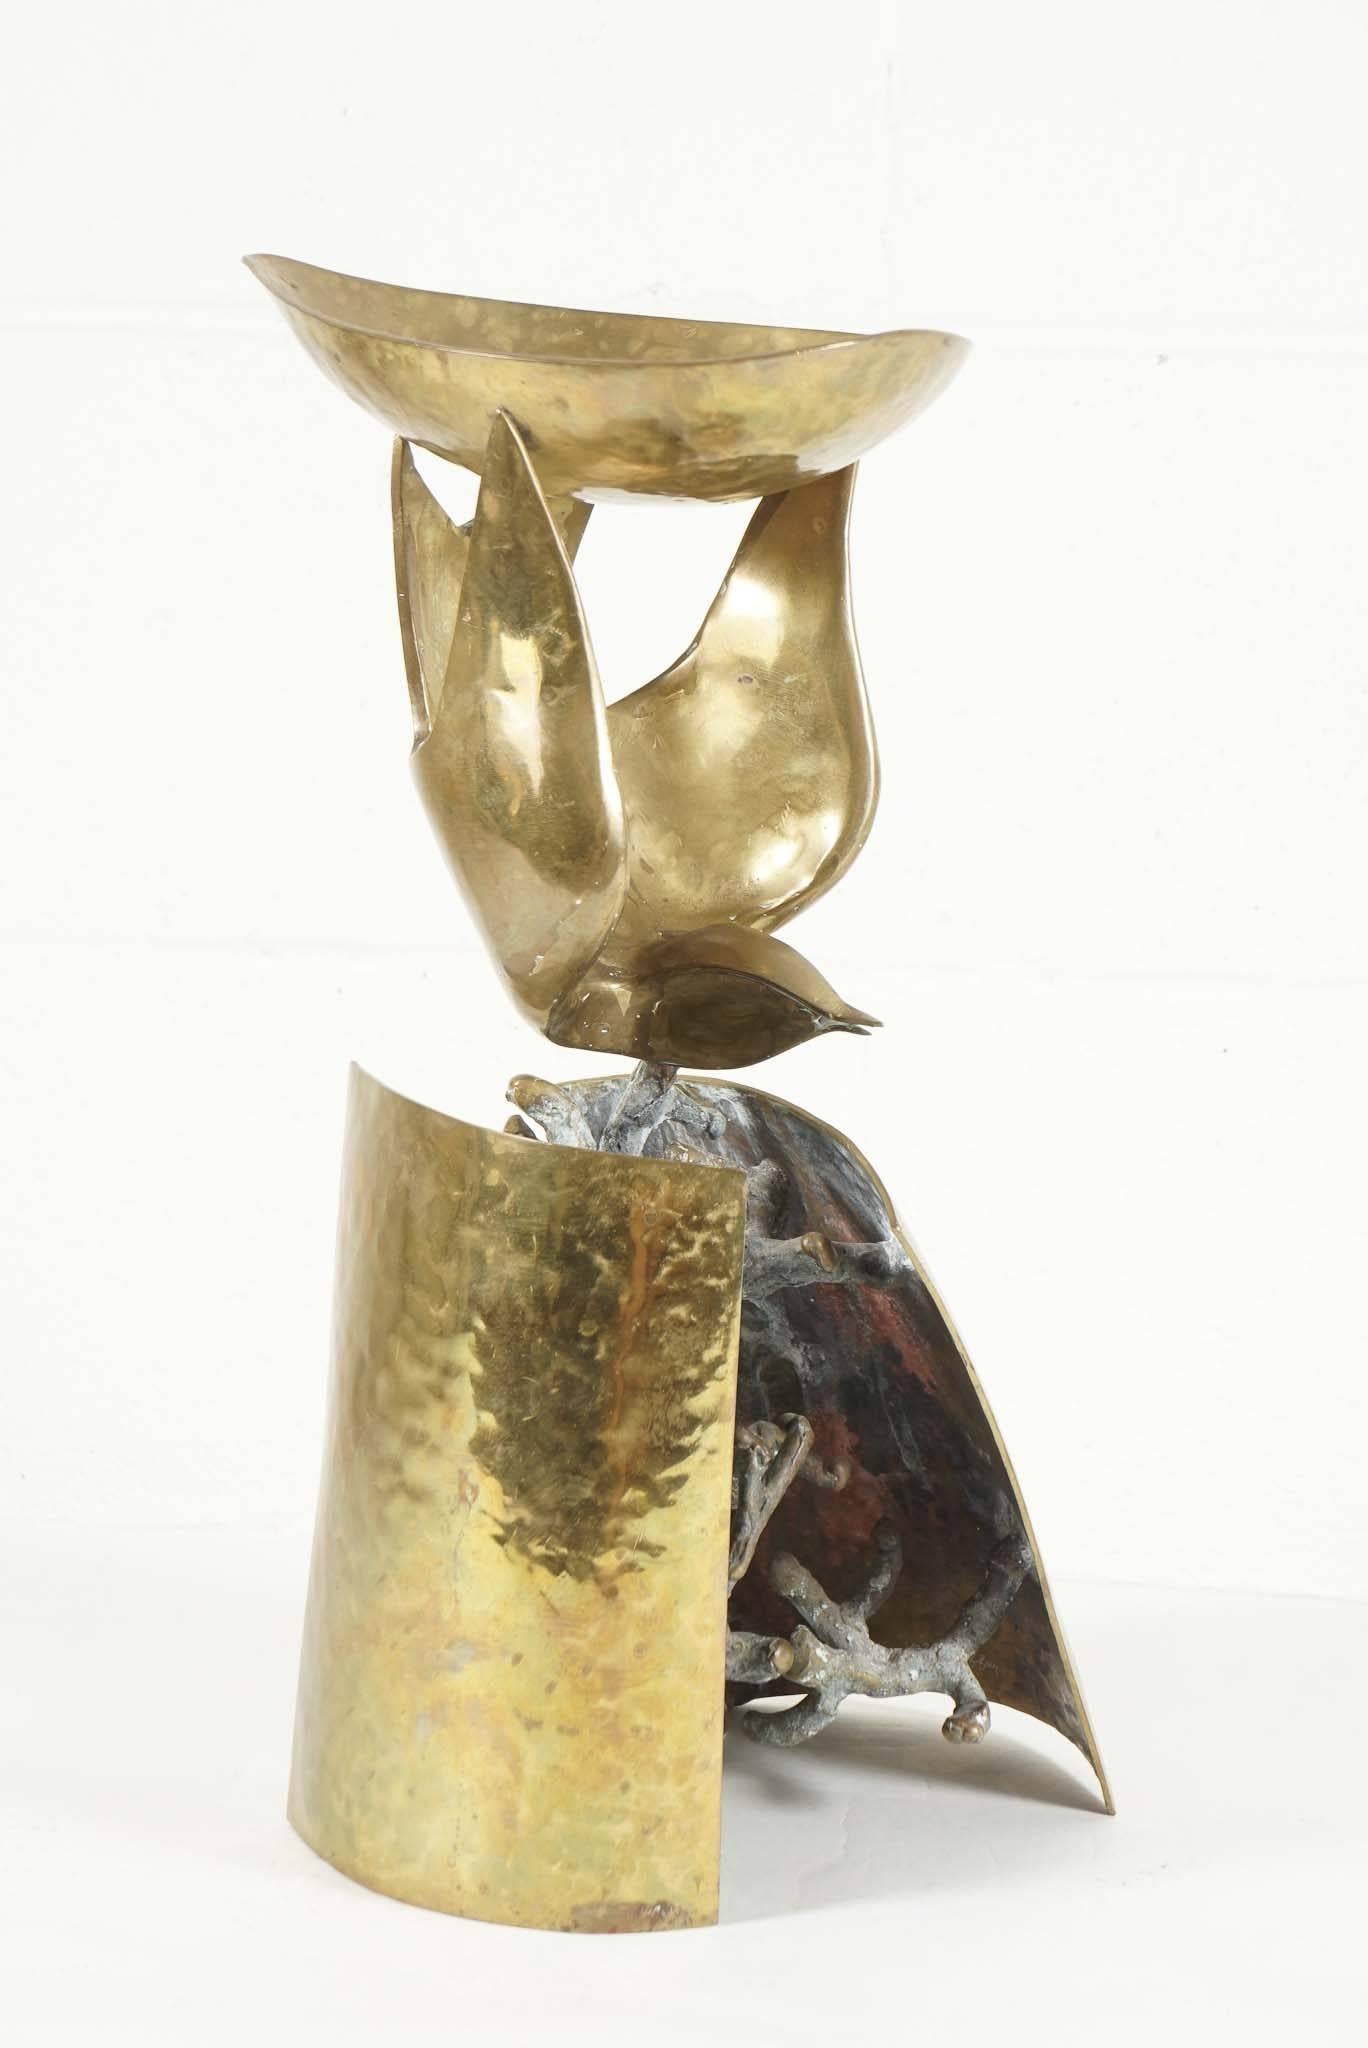 Here is a modern brass sculpture by O.V. Shaffer of a dove on top of an oxidized coral branch with a wall surround and a tray top. This is a great sculpture that also functions as a key or coin holder.